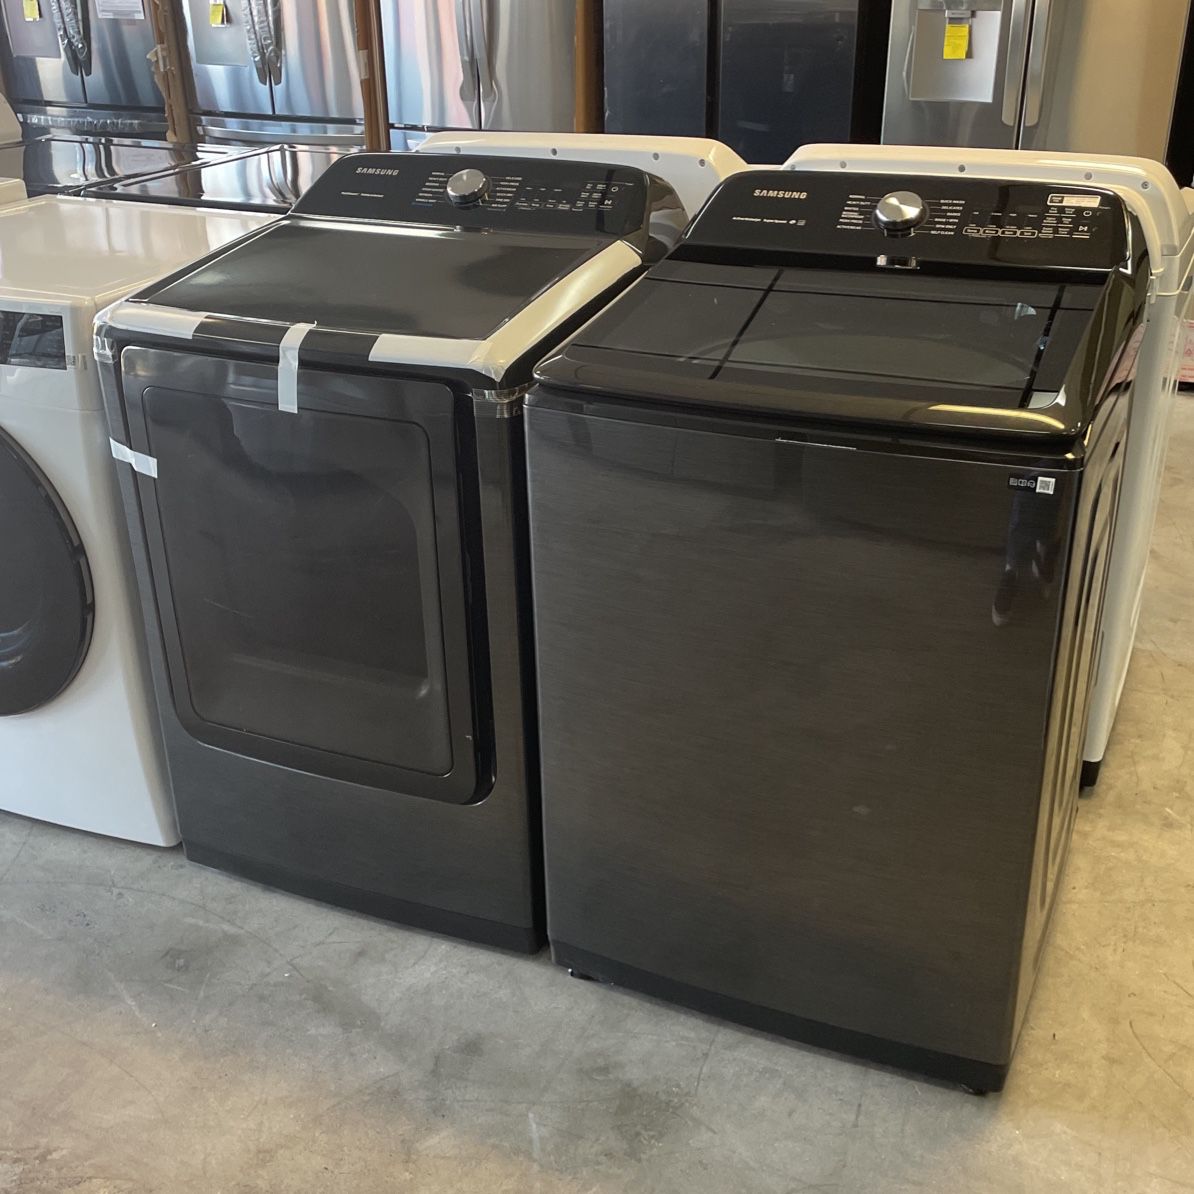 Samsung Top Load Washer And Dryer Set In Black 